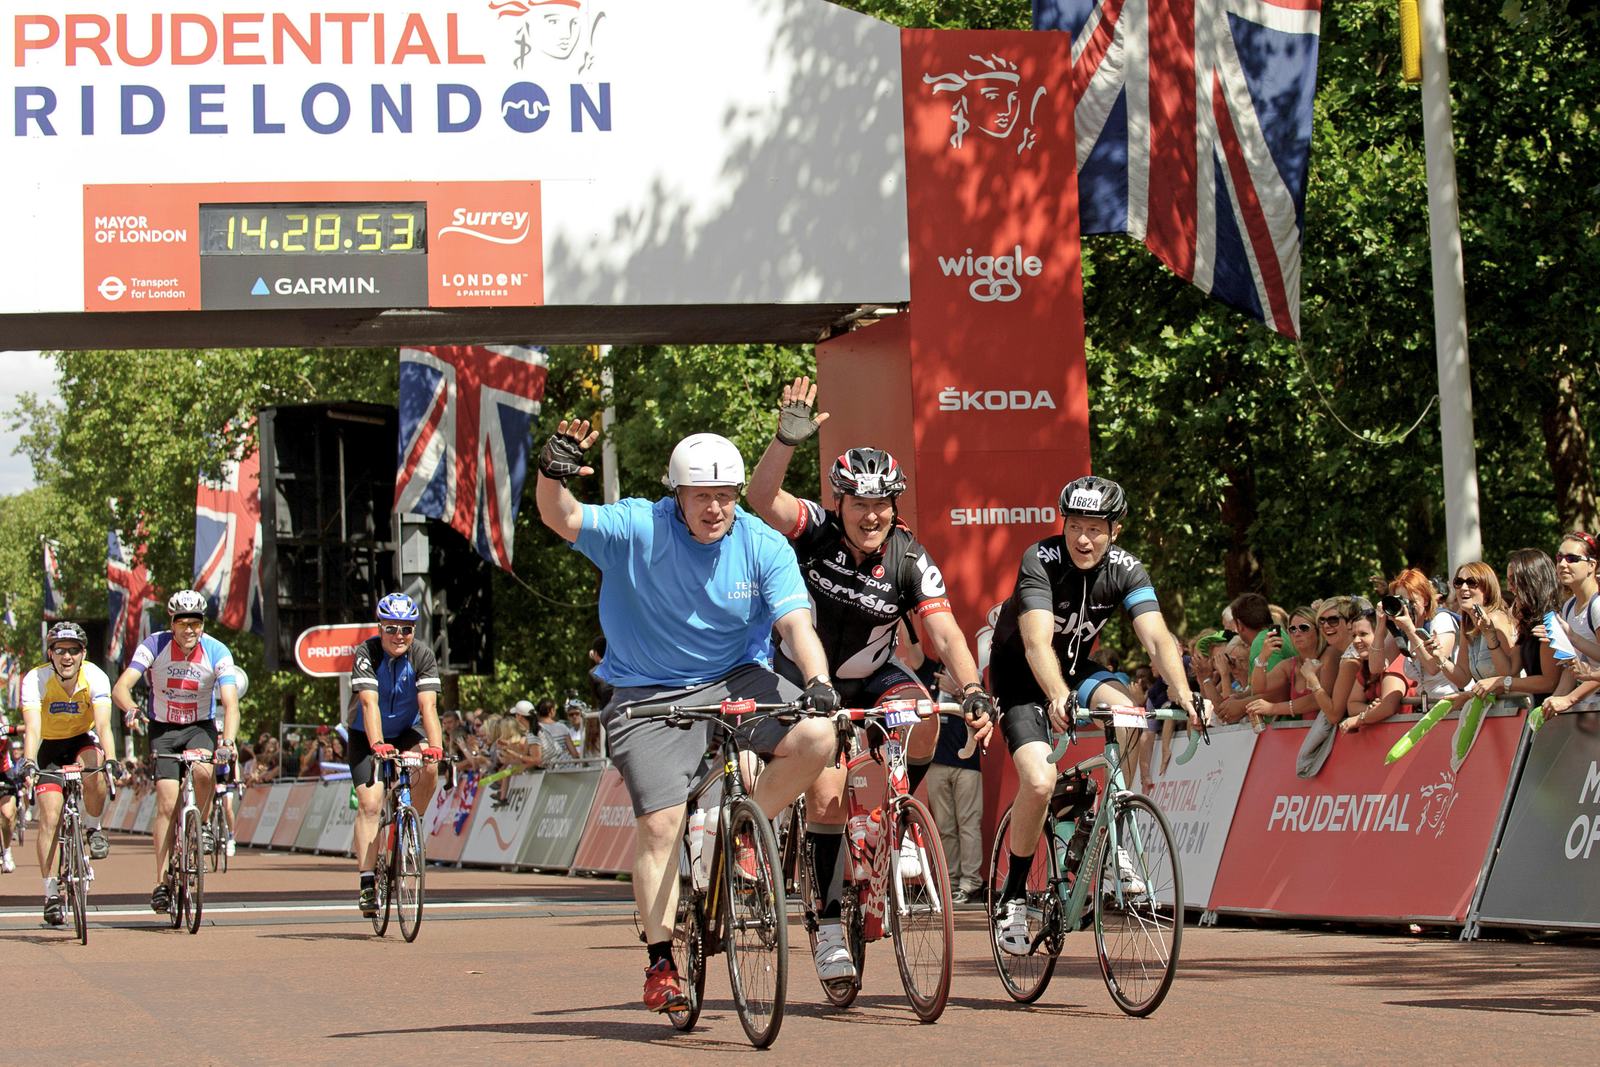 Amongst many celebrity participants the London mayor himself, Boris Johnson, completed the 160km route in eight hours.